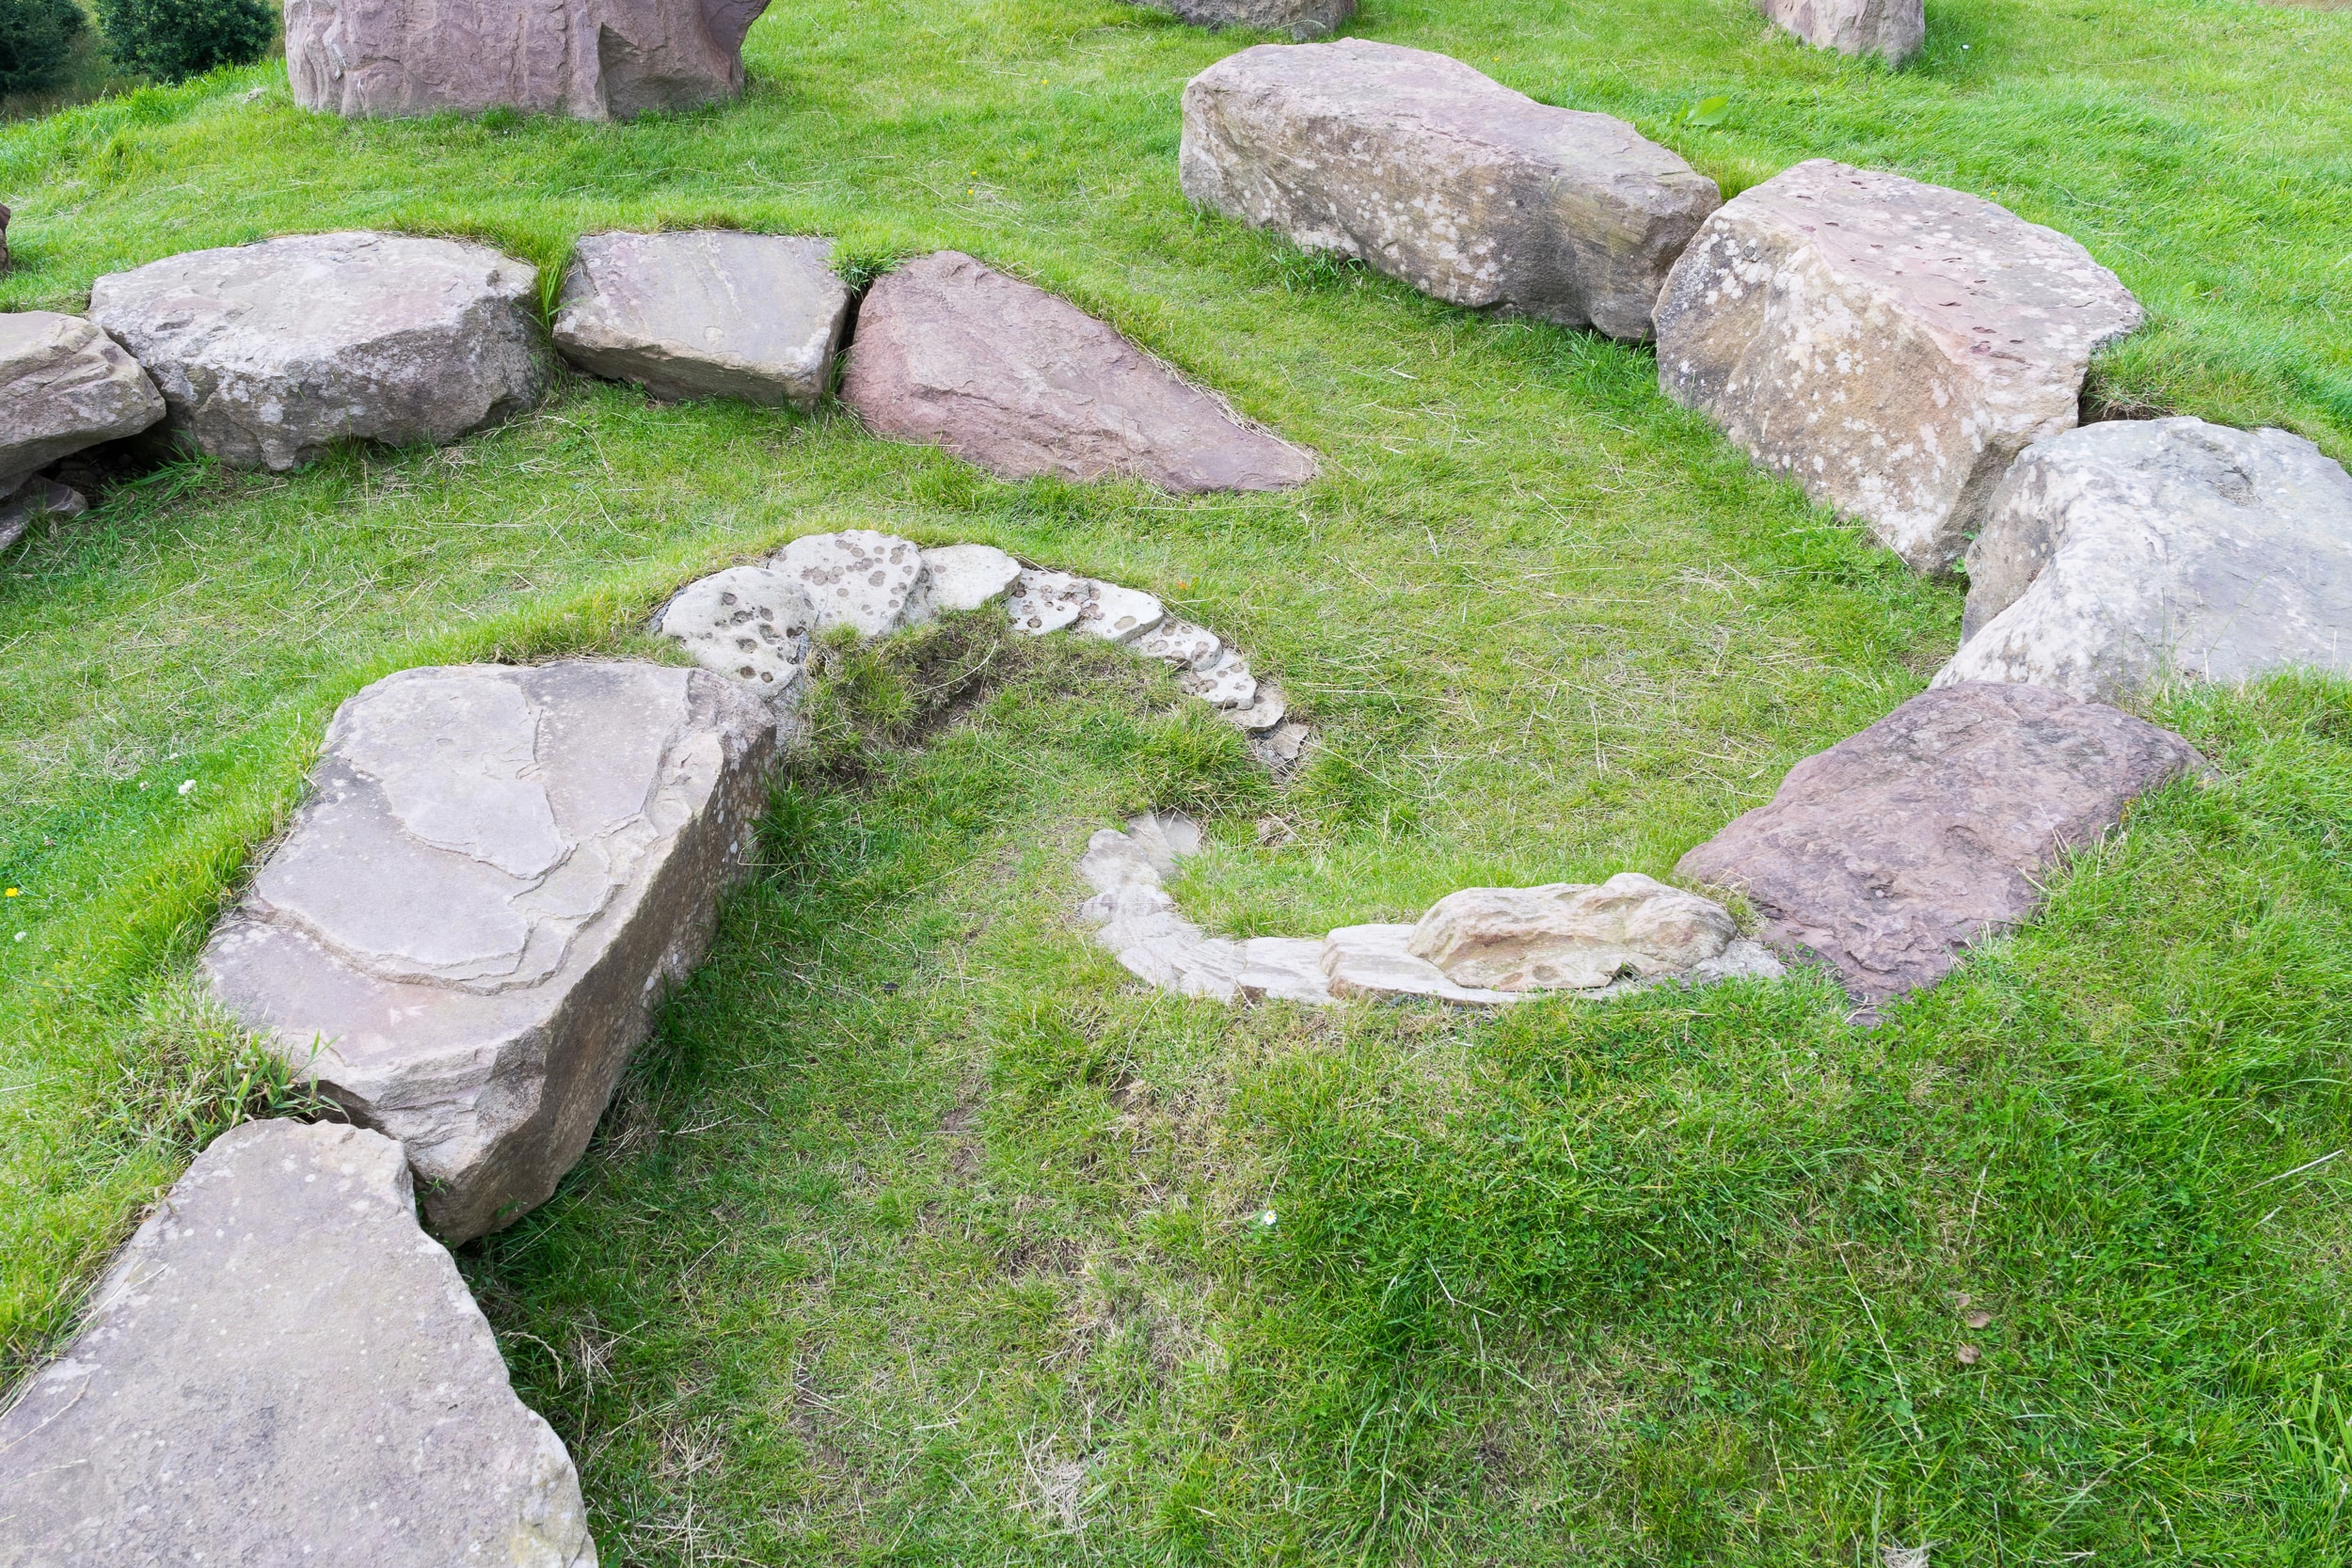 Stones arranged in a spiral on green grass.